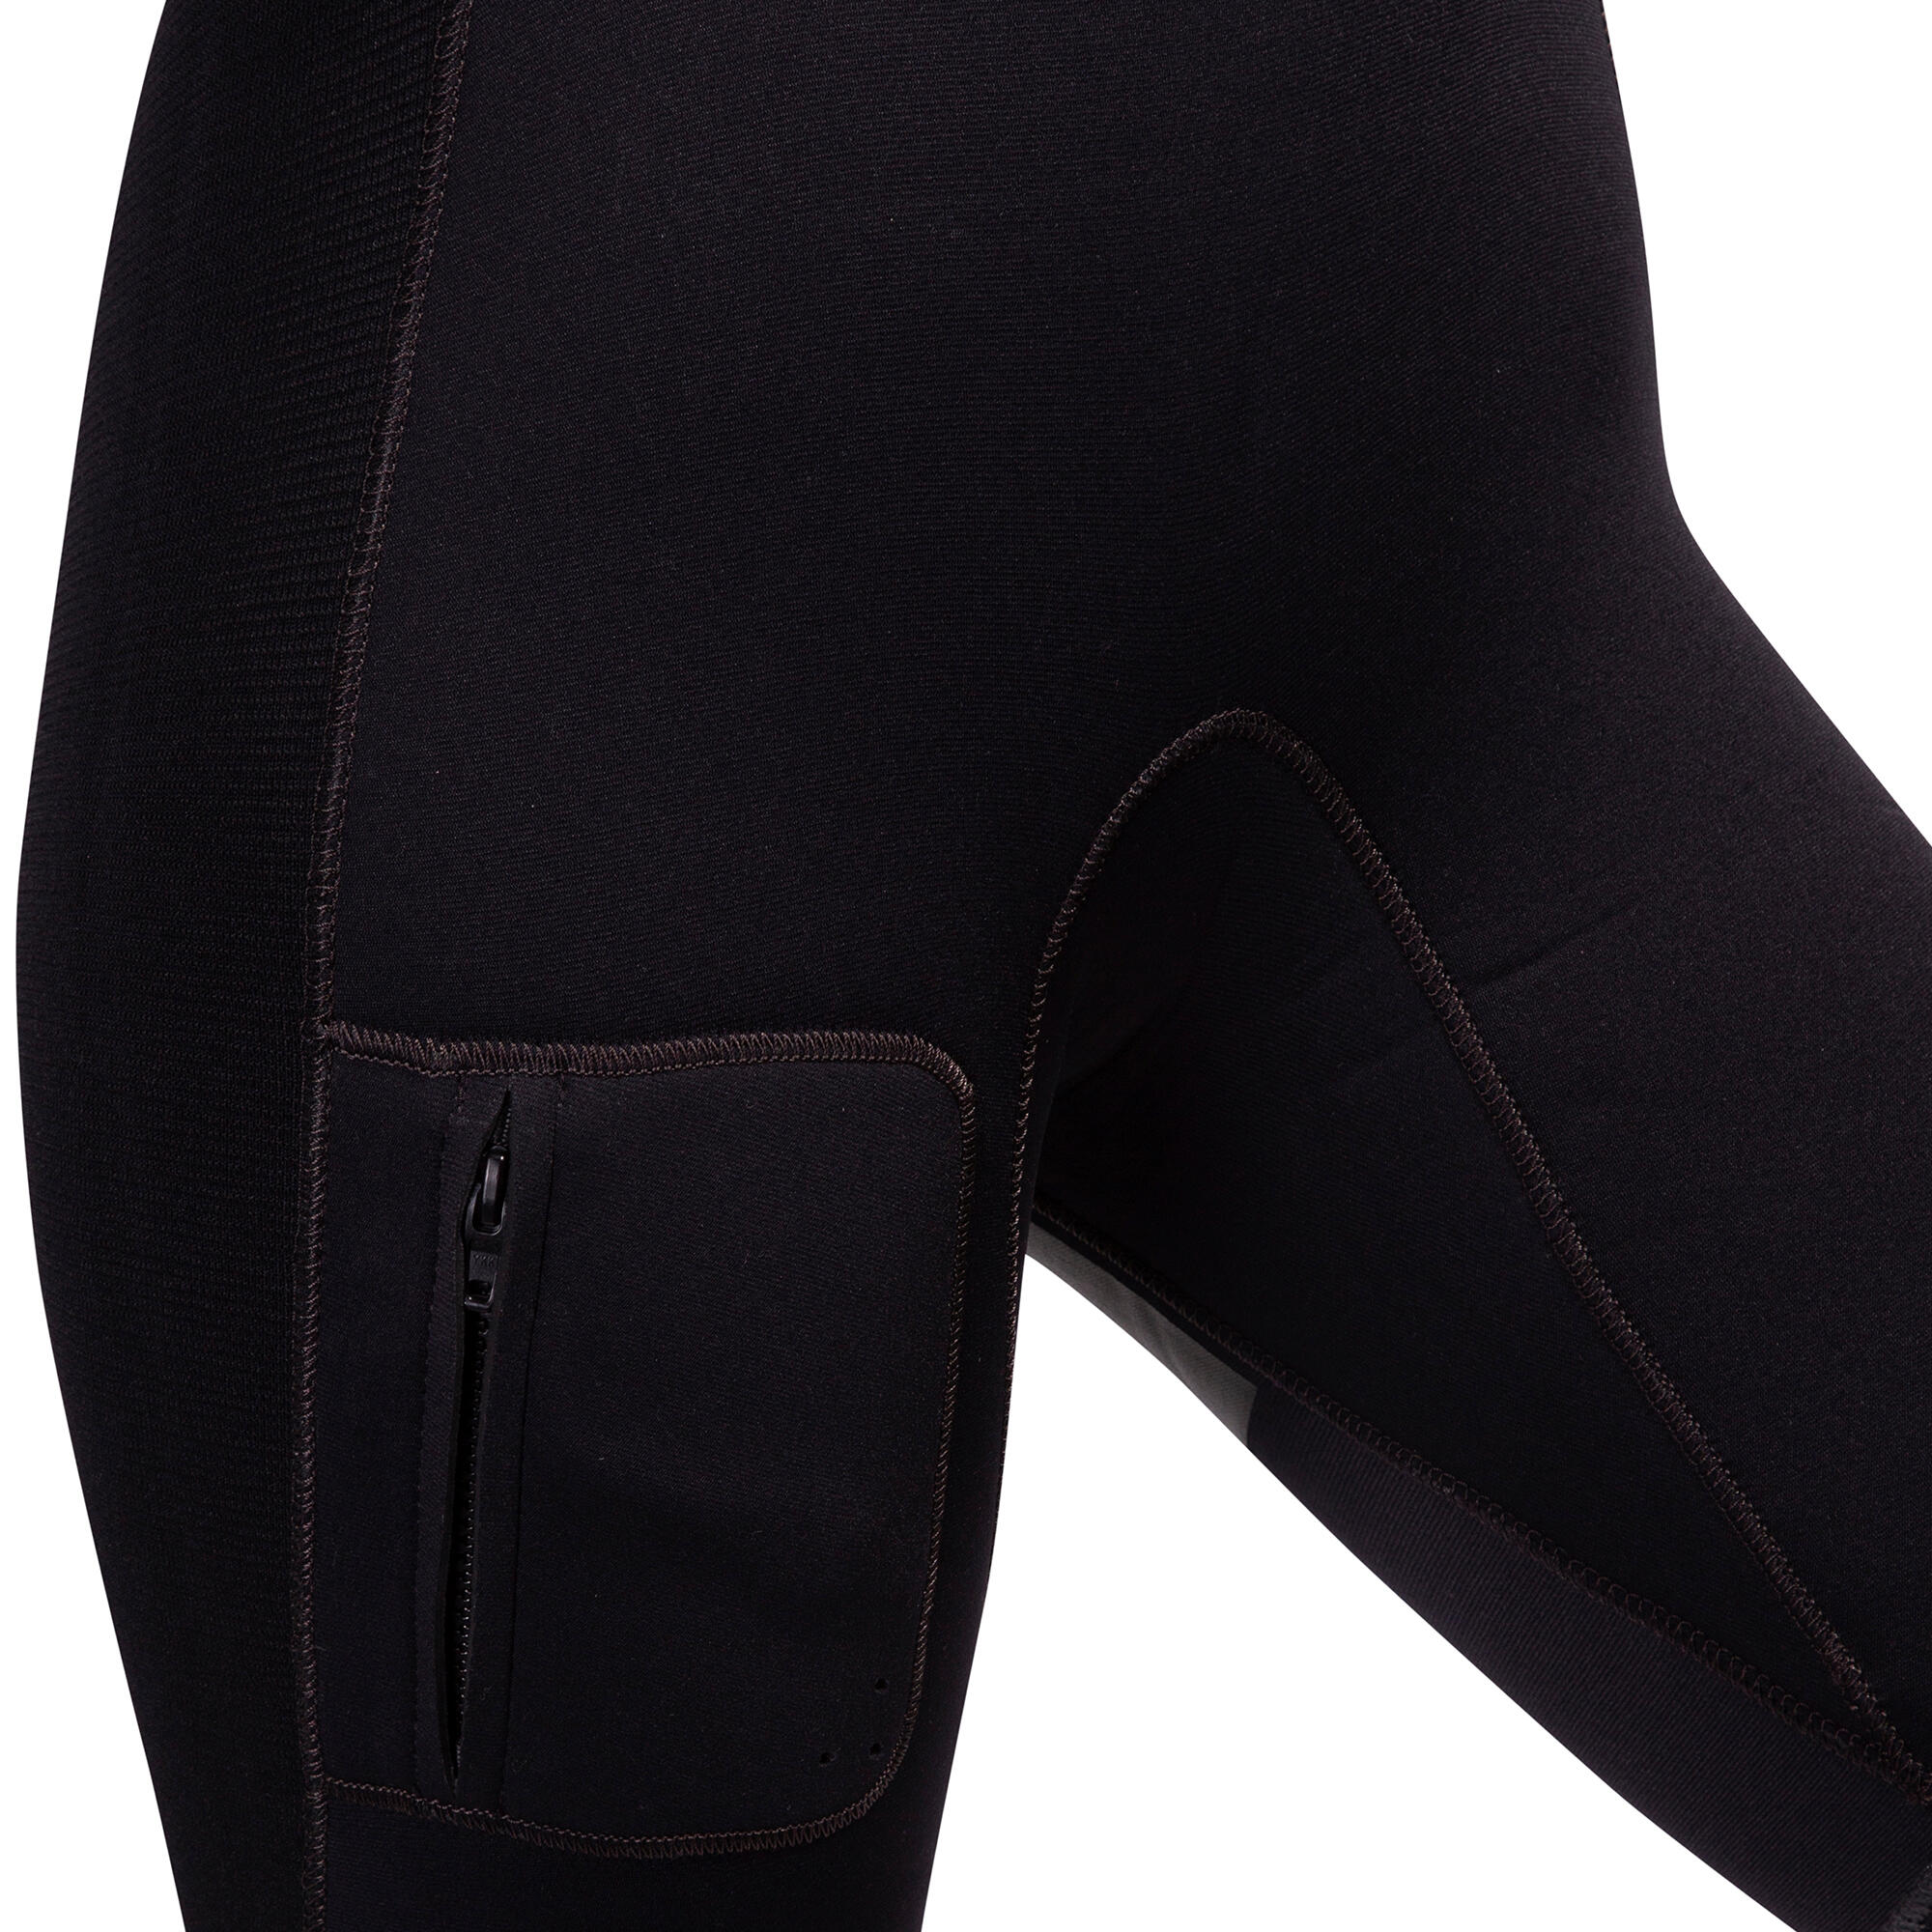 Women's Canyoning Wetsuit Trousers 5 mm - MK 500 9/17